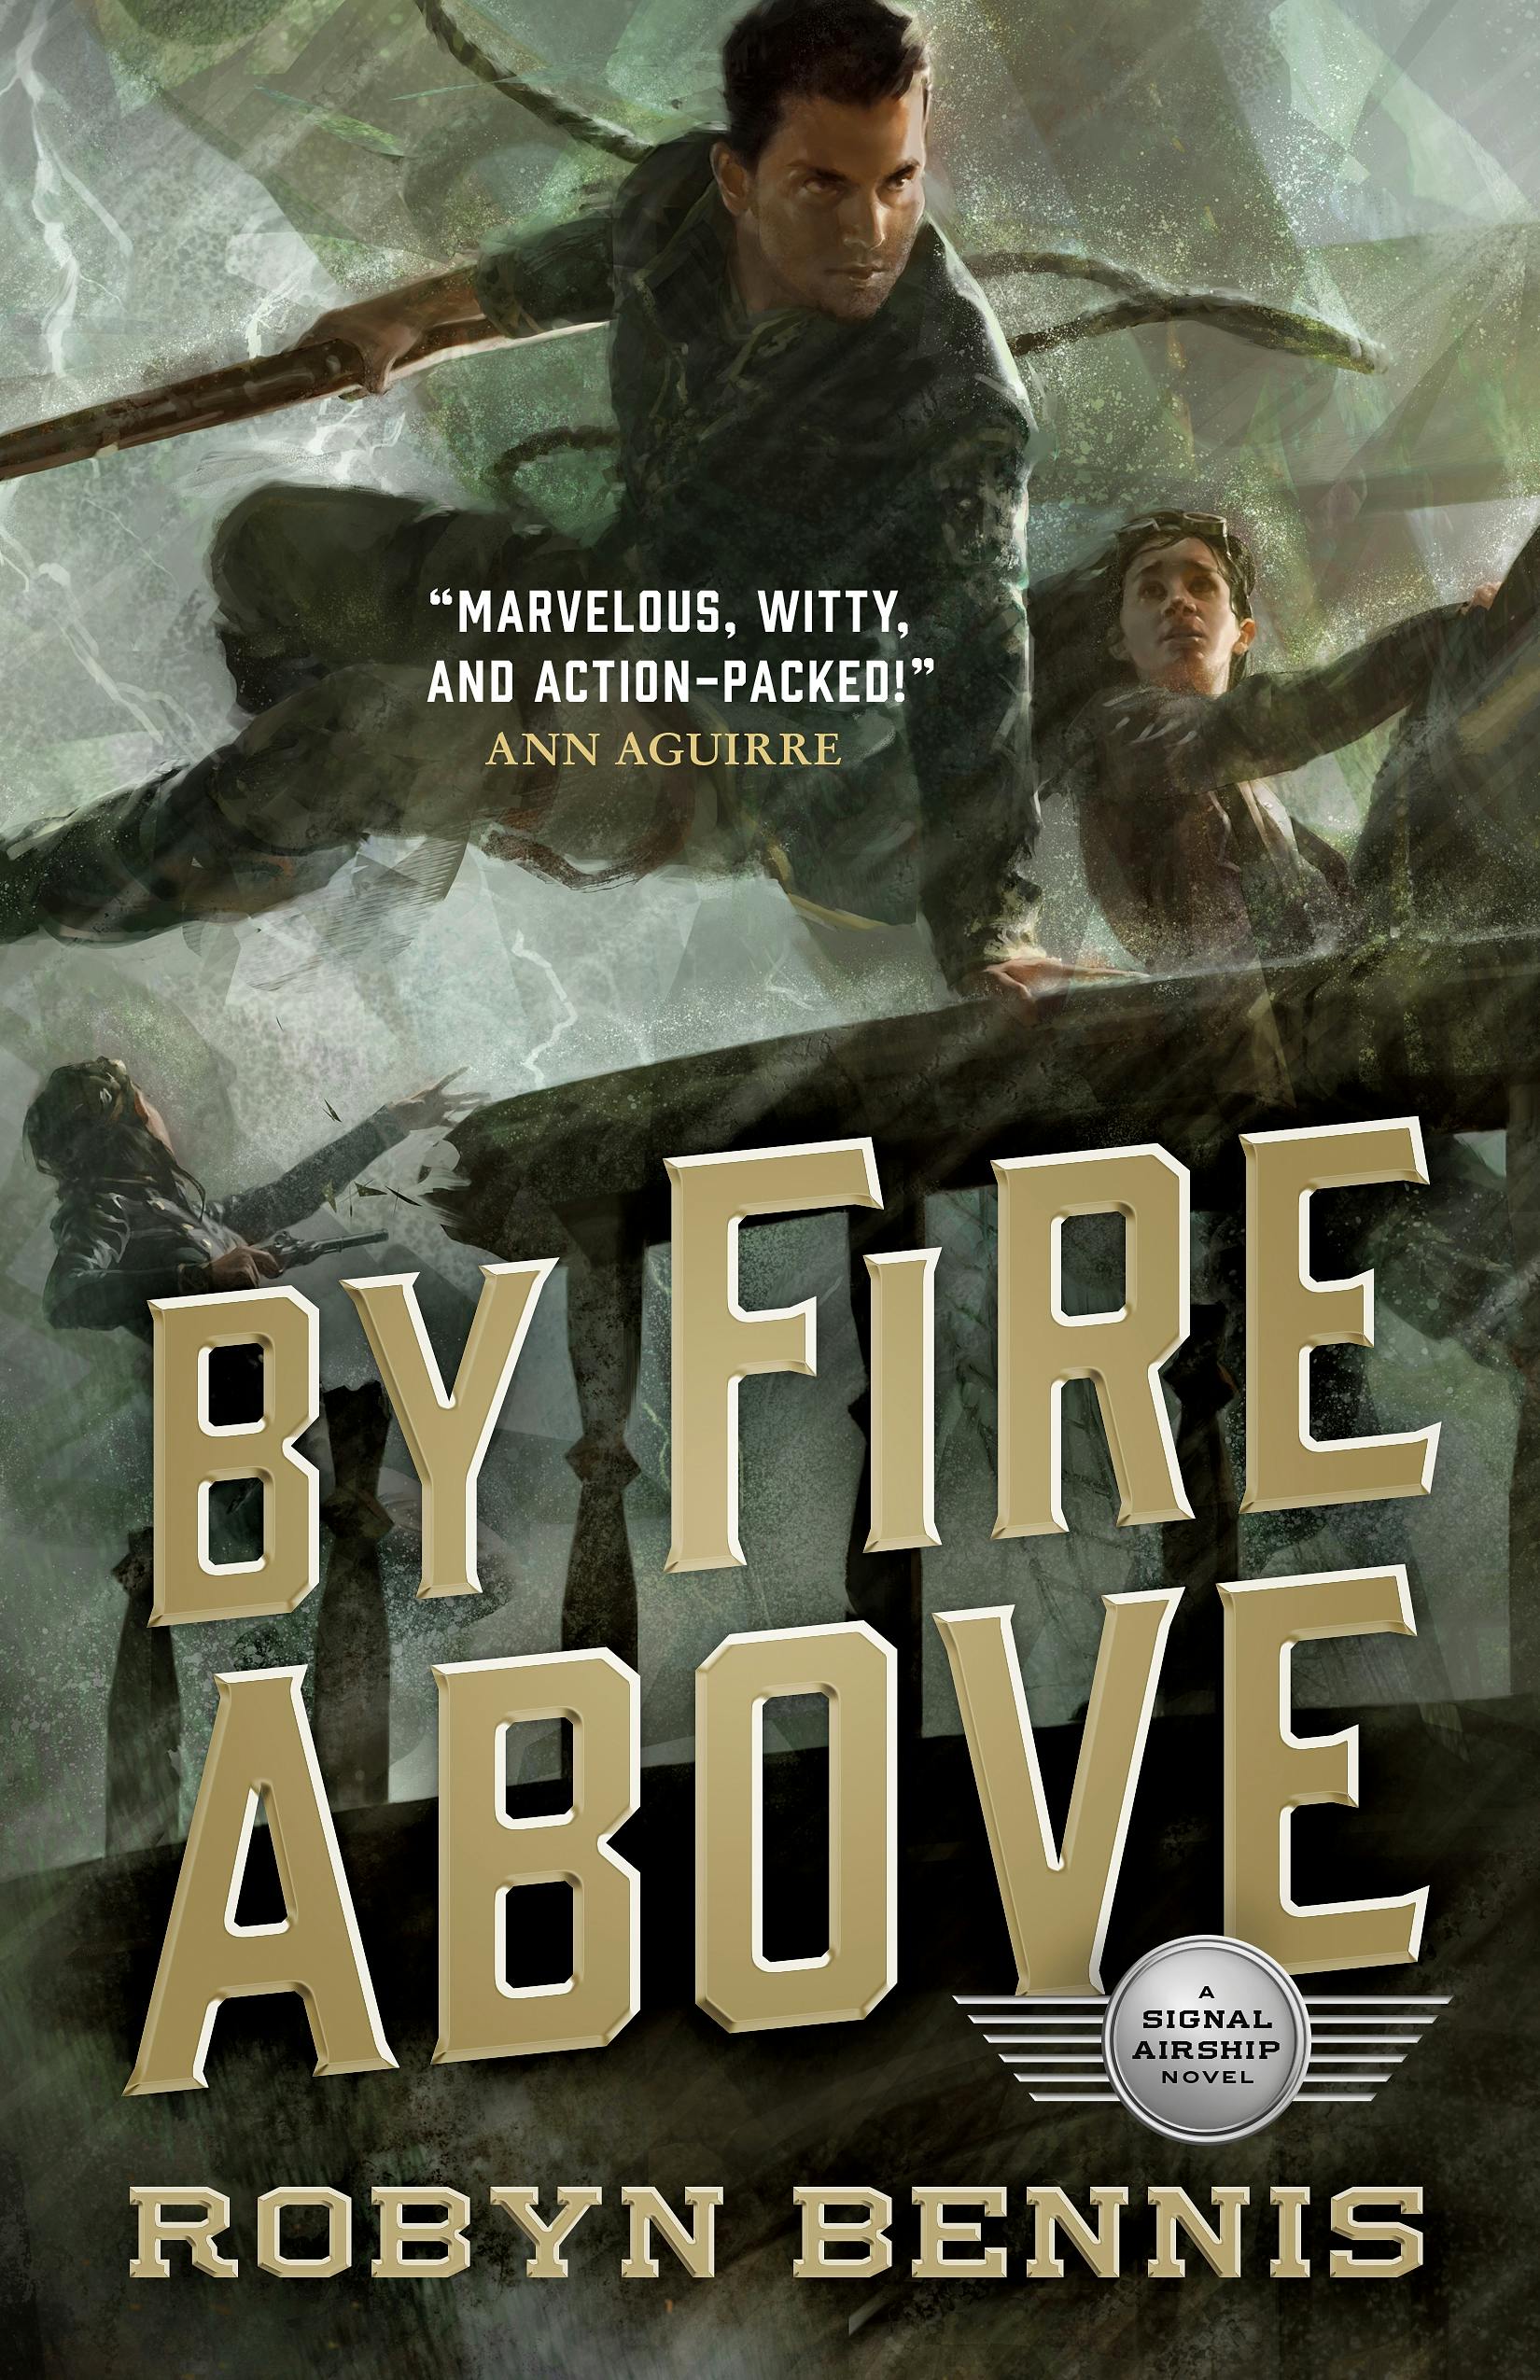 Cover for the book titled as: By Fire Above